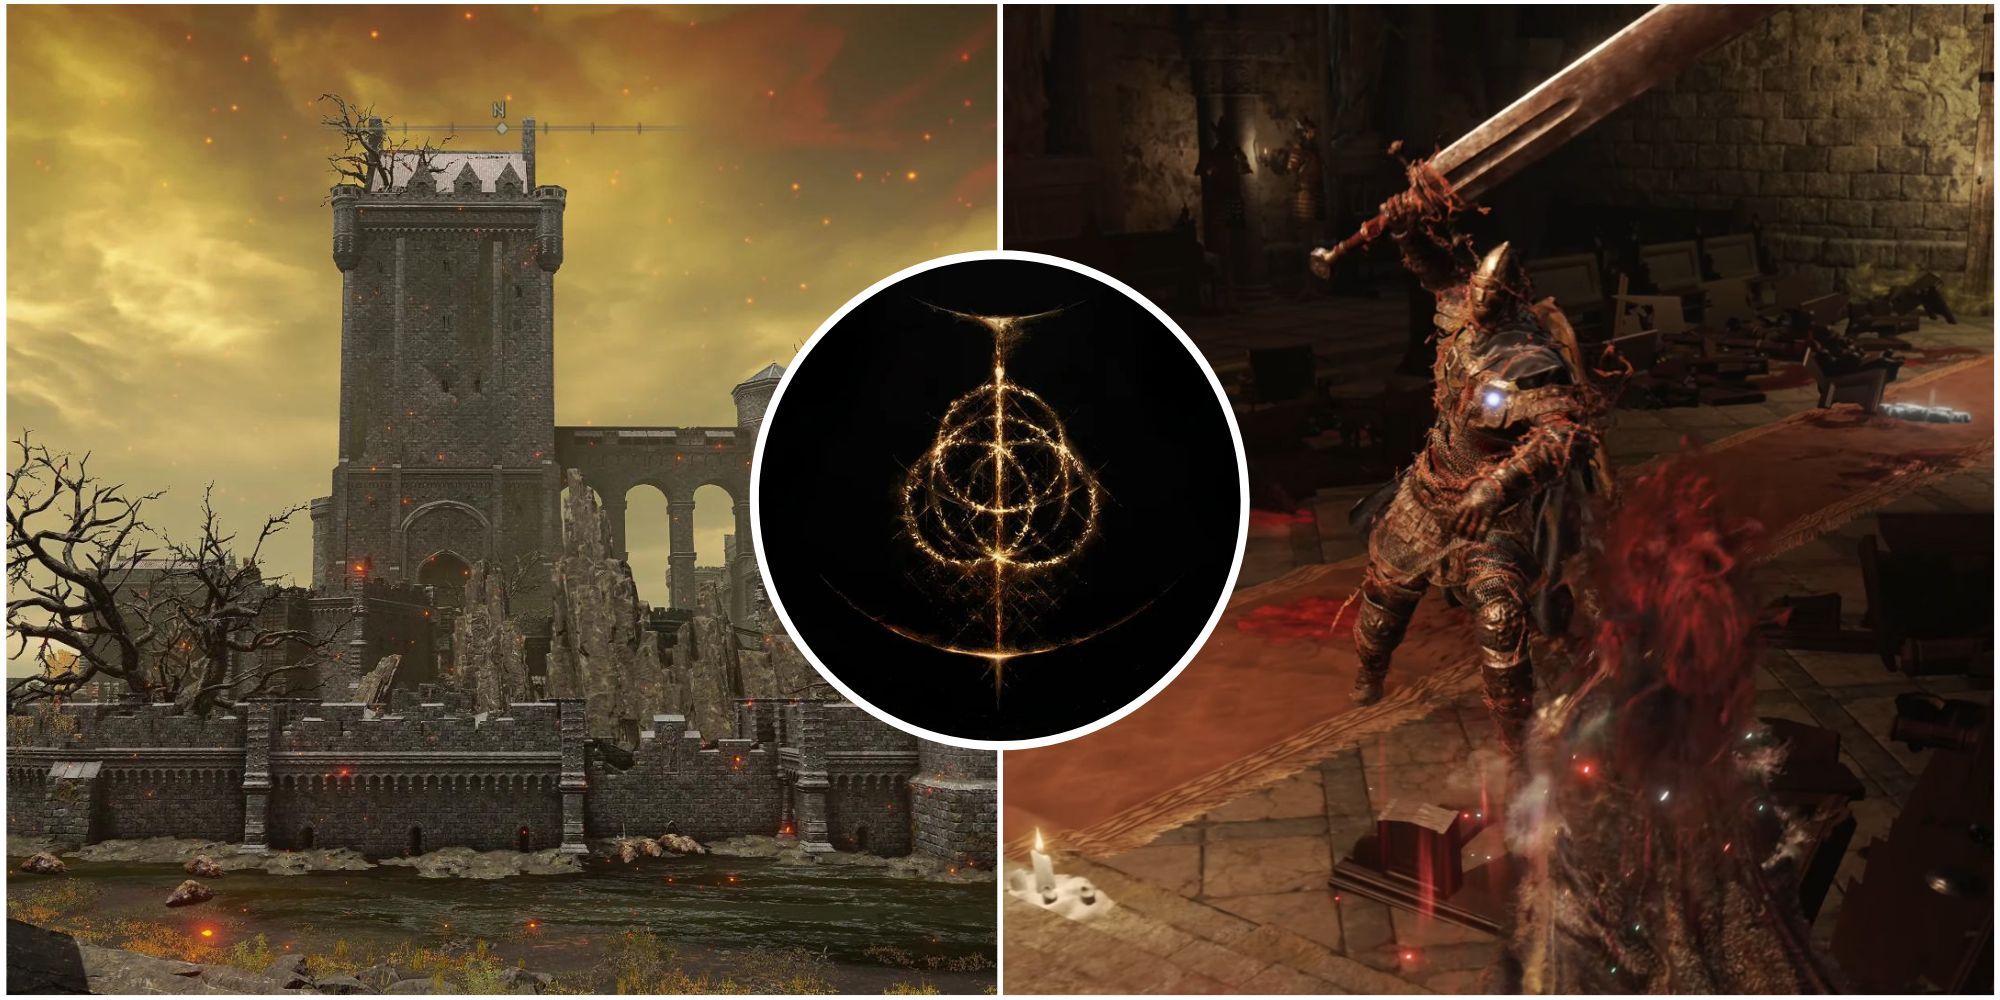 Featured image for Elden Ring showcasing the Shaded Castle and Elmer of the Briar Boss Enemy